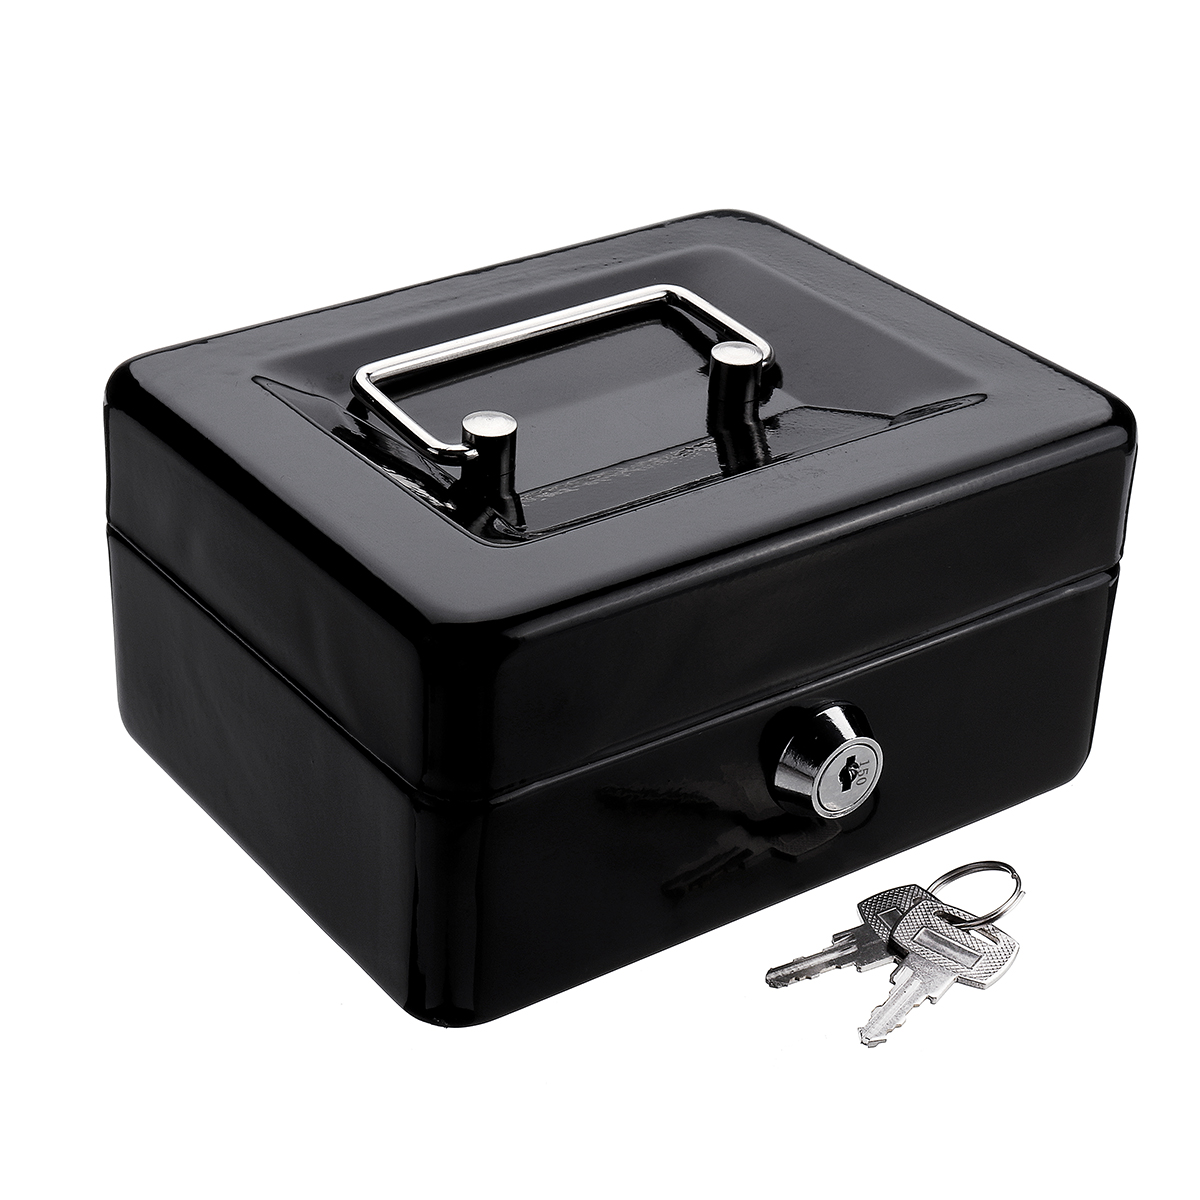 Mini-Portable-Money-Safe-Storage-Case-Black-Sturdy-Metal-With-Coin-Tray-Cash-Carry-Box-1346714-6